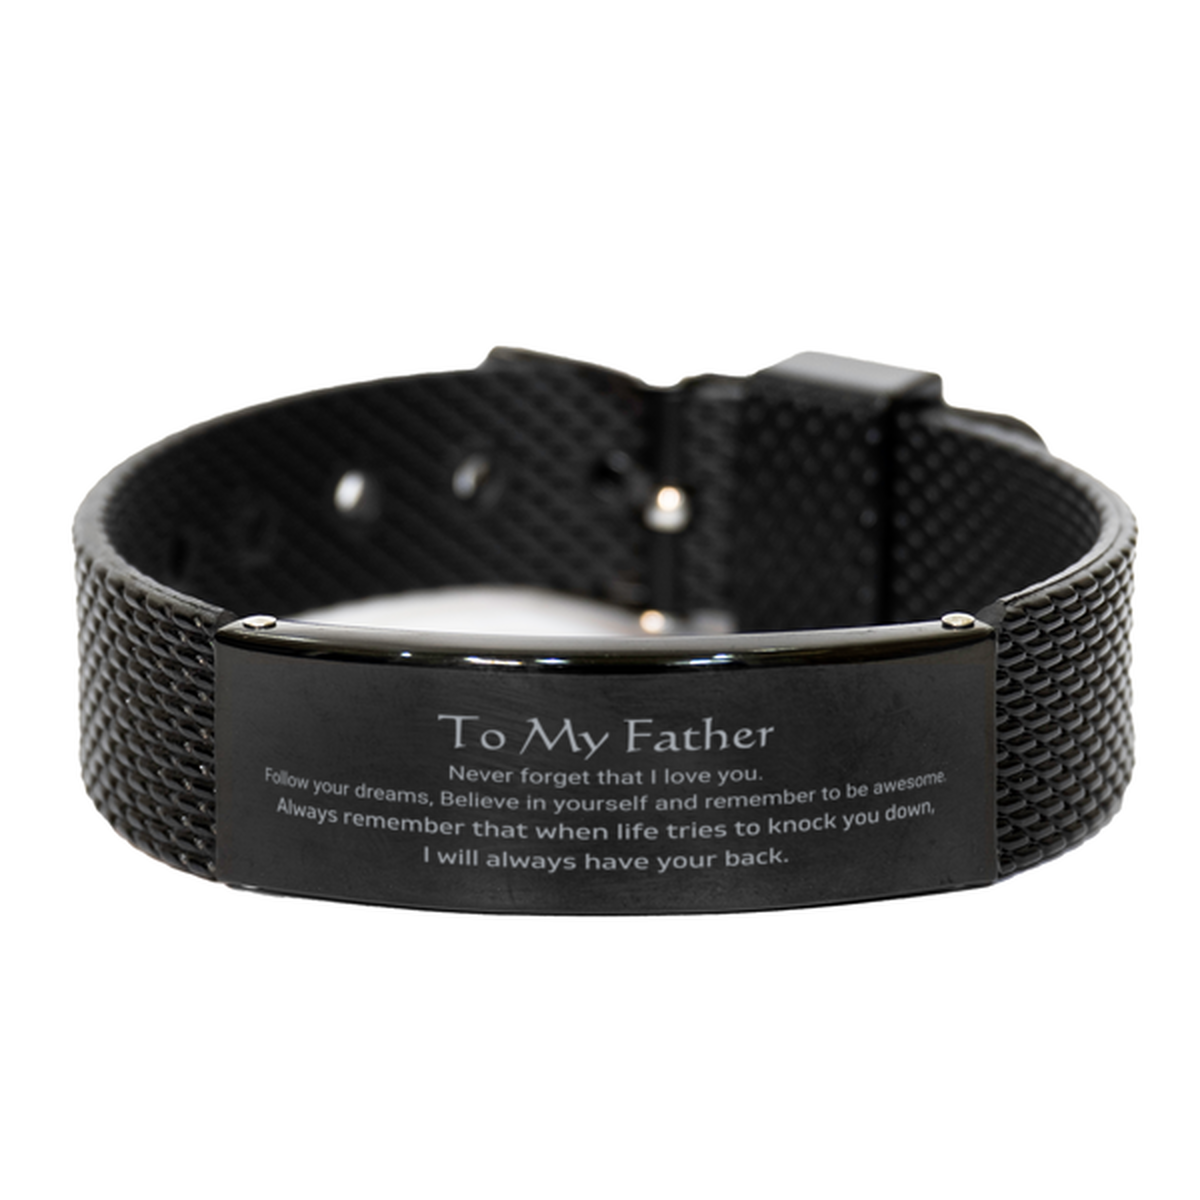 Inspirational Gifts for Father, Follow your dreams, Believe in yourself, Father Black Shark Mesh Bracelet, Birthday Christmas Unique Gifts For Father